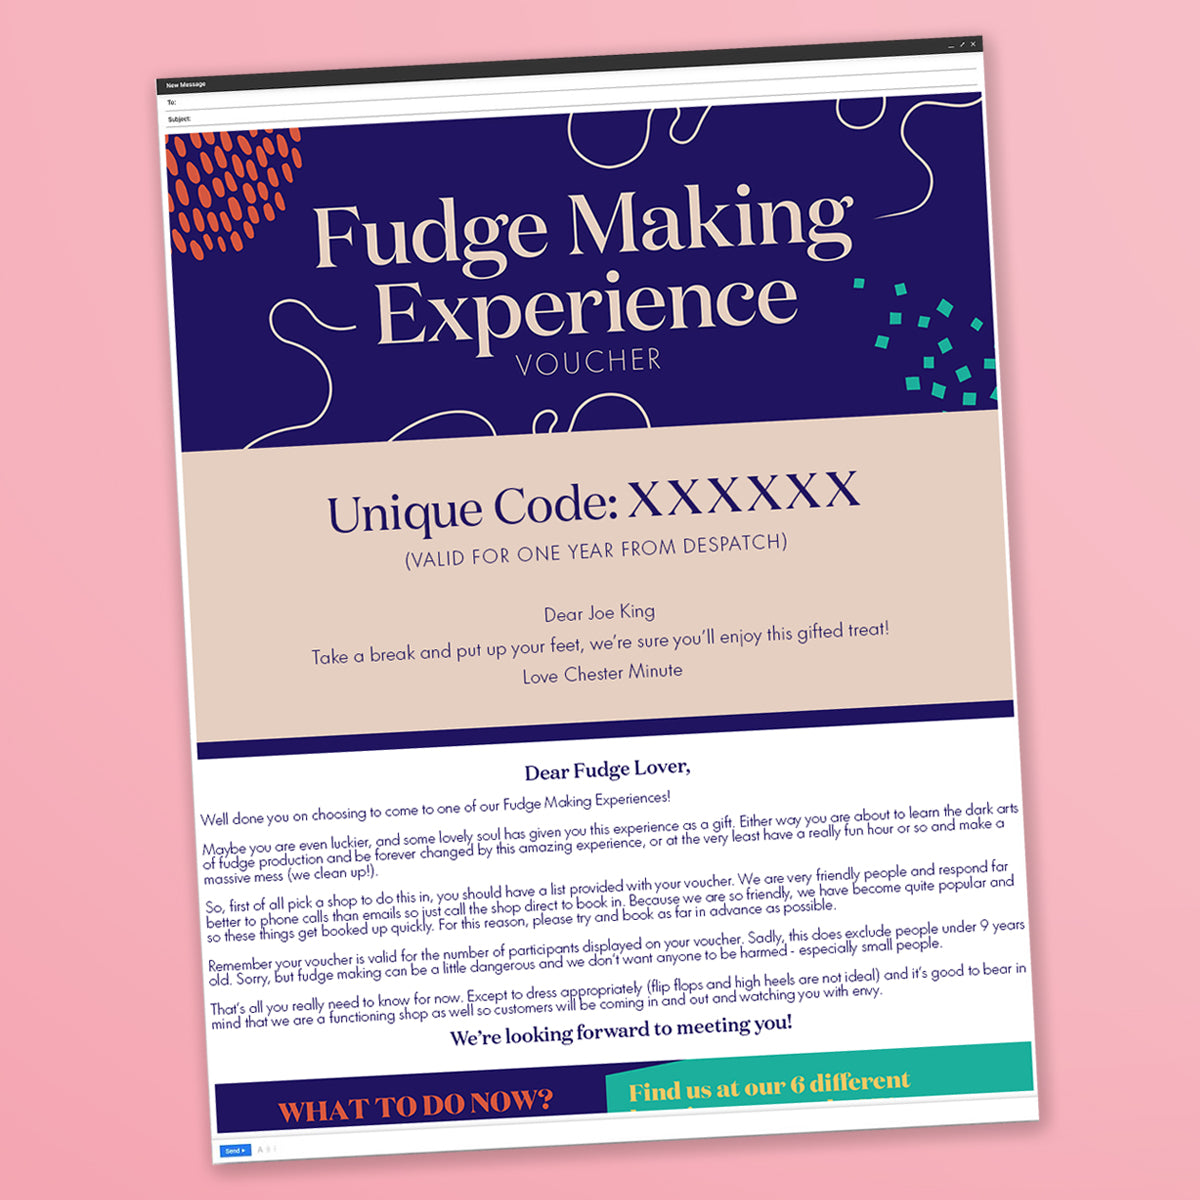 Fudge Making Experience - Digital Instant Gift